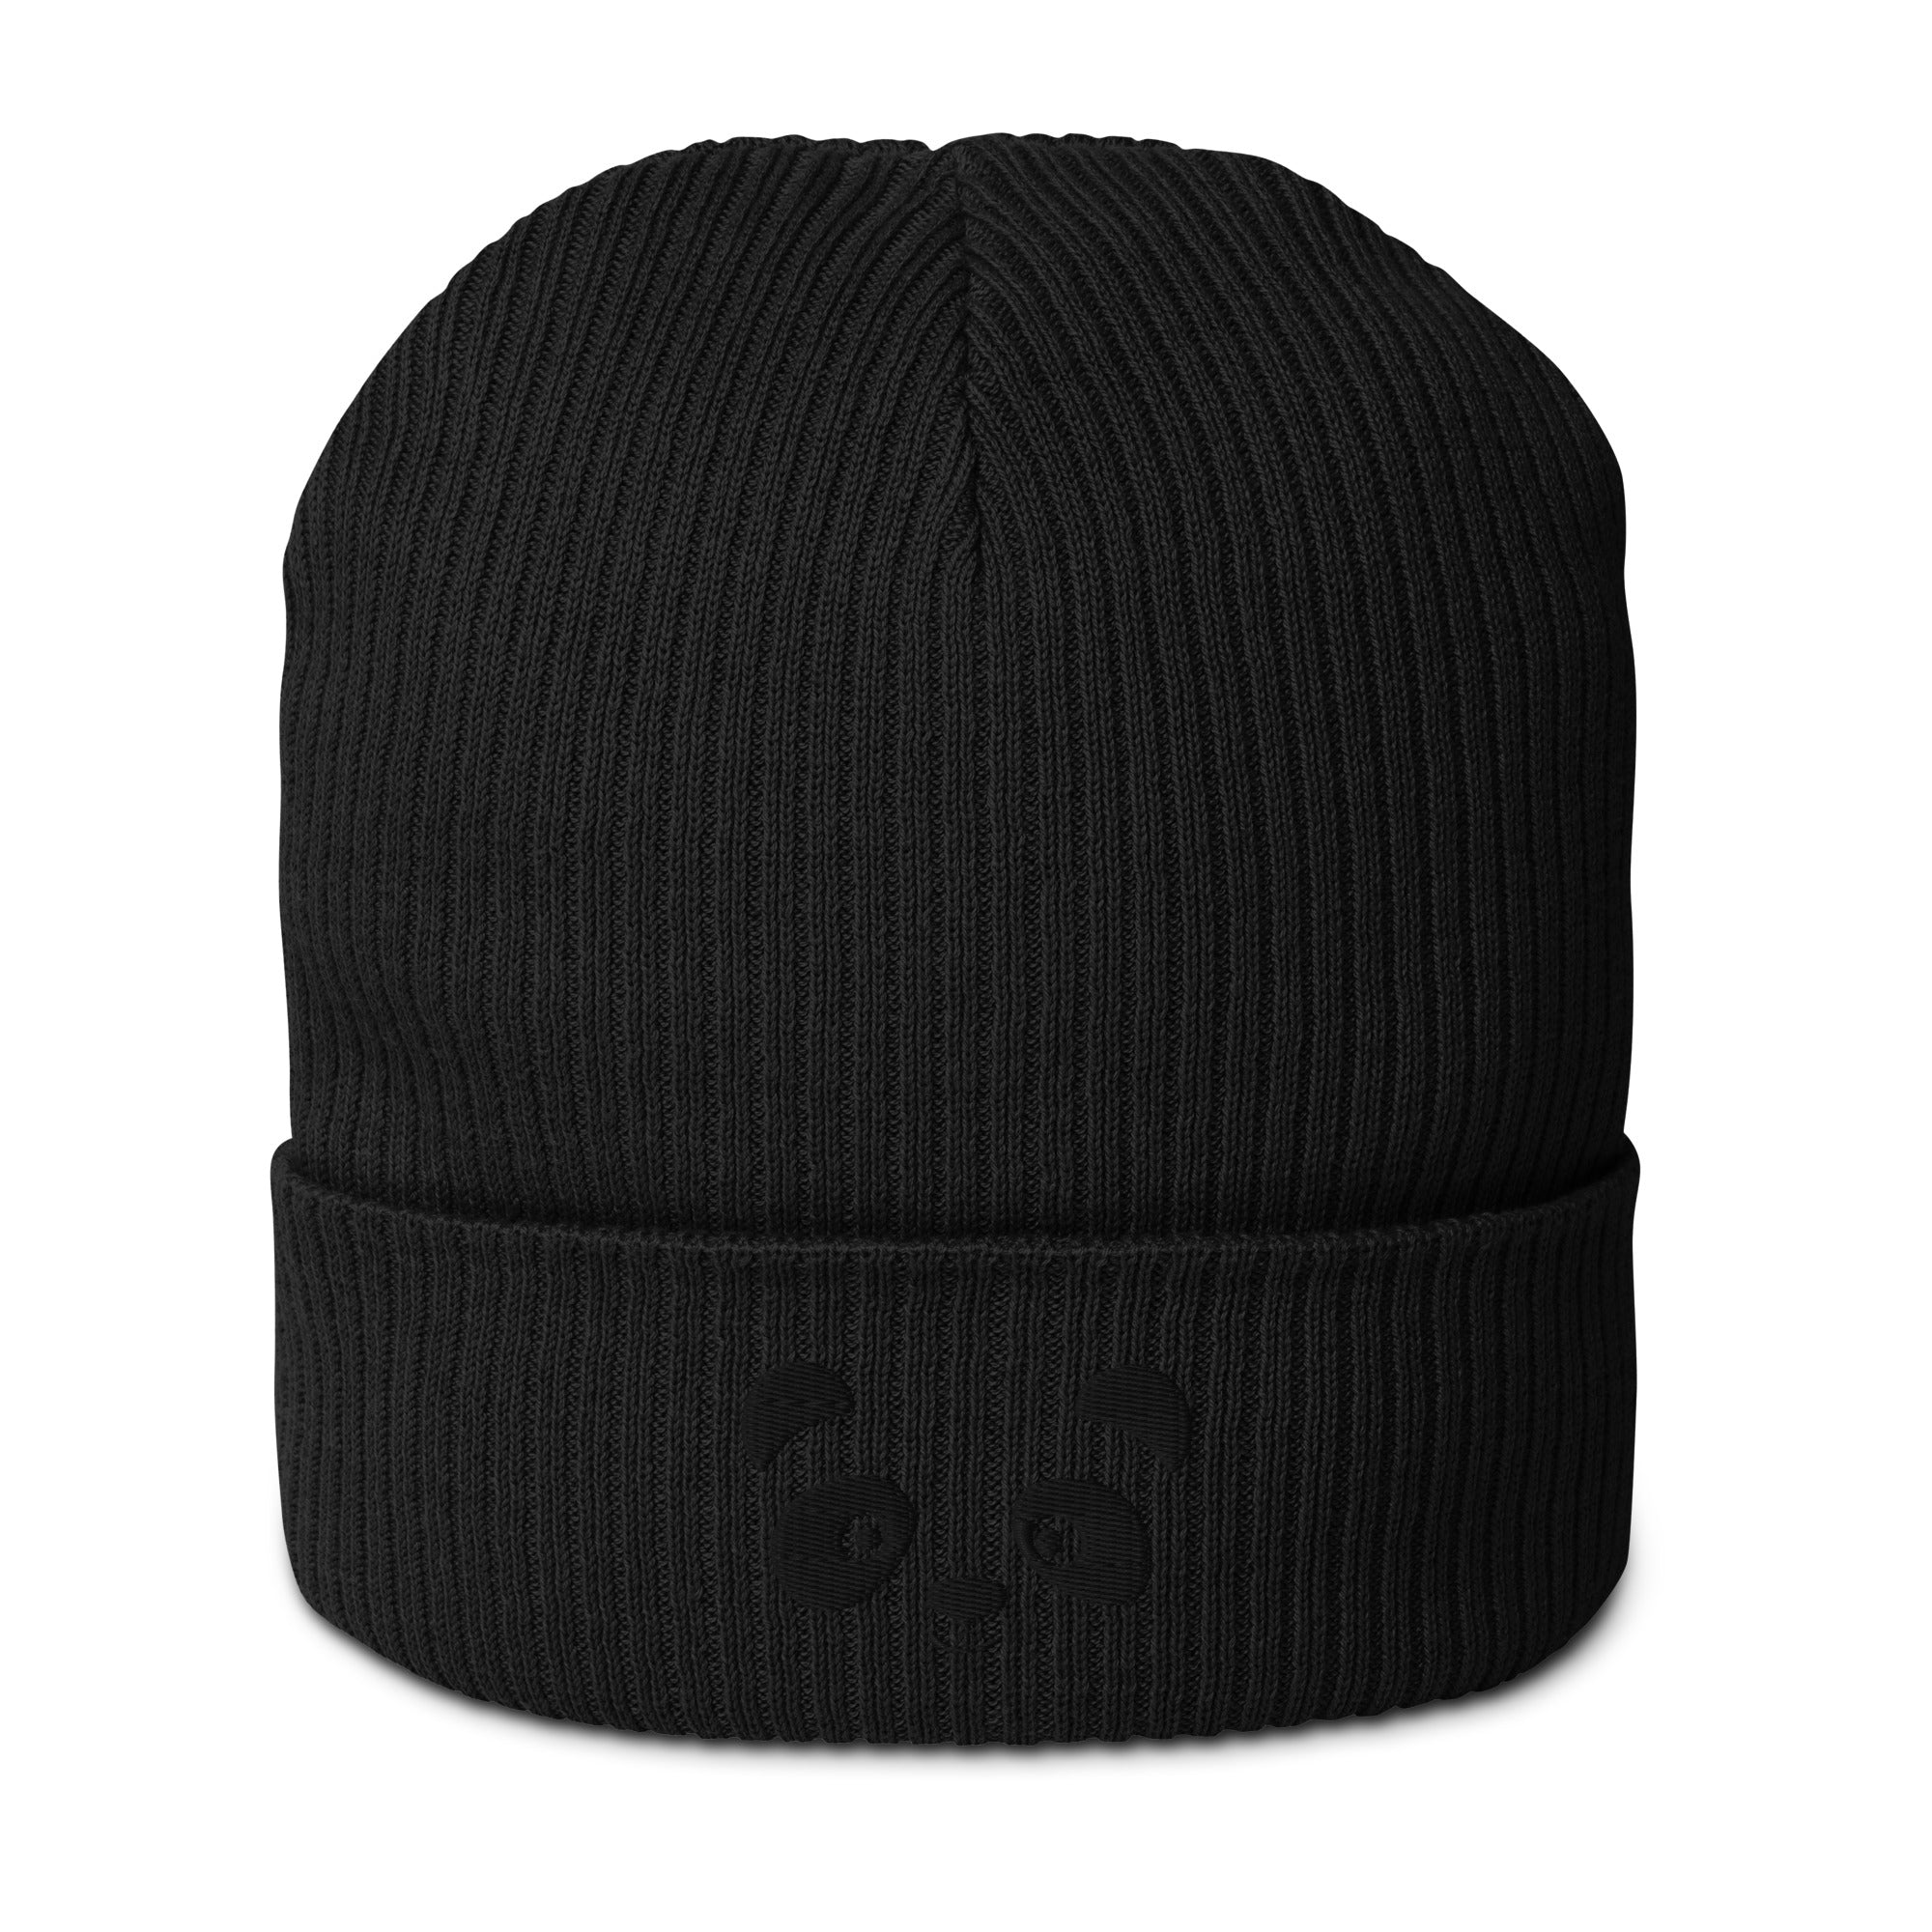 Panda face black embroidered, organic cotton ribbed beanie-14